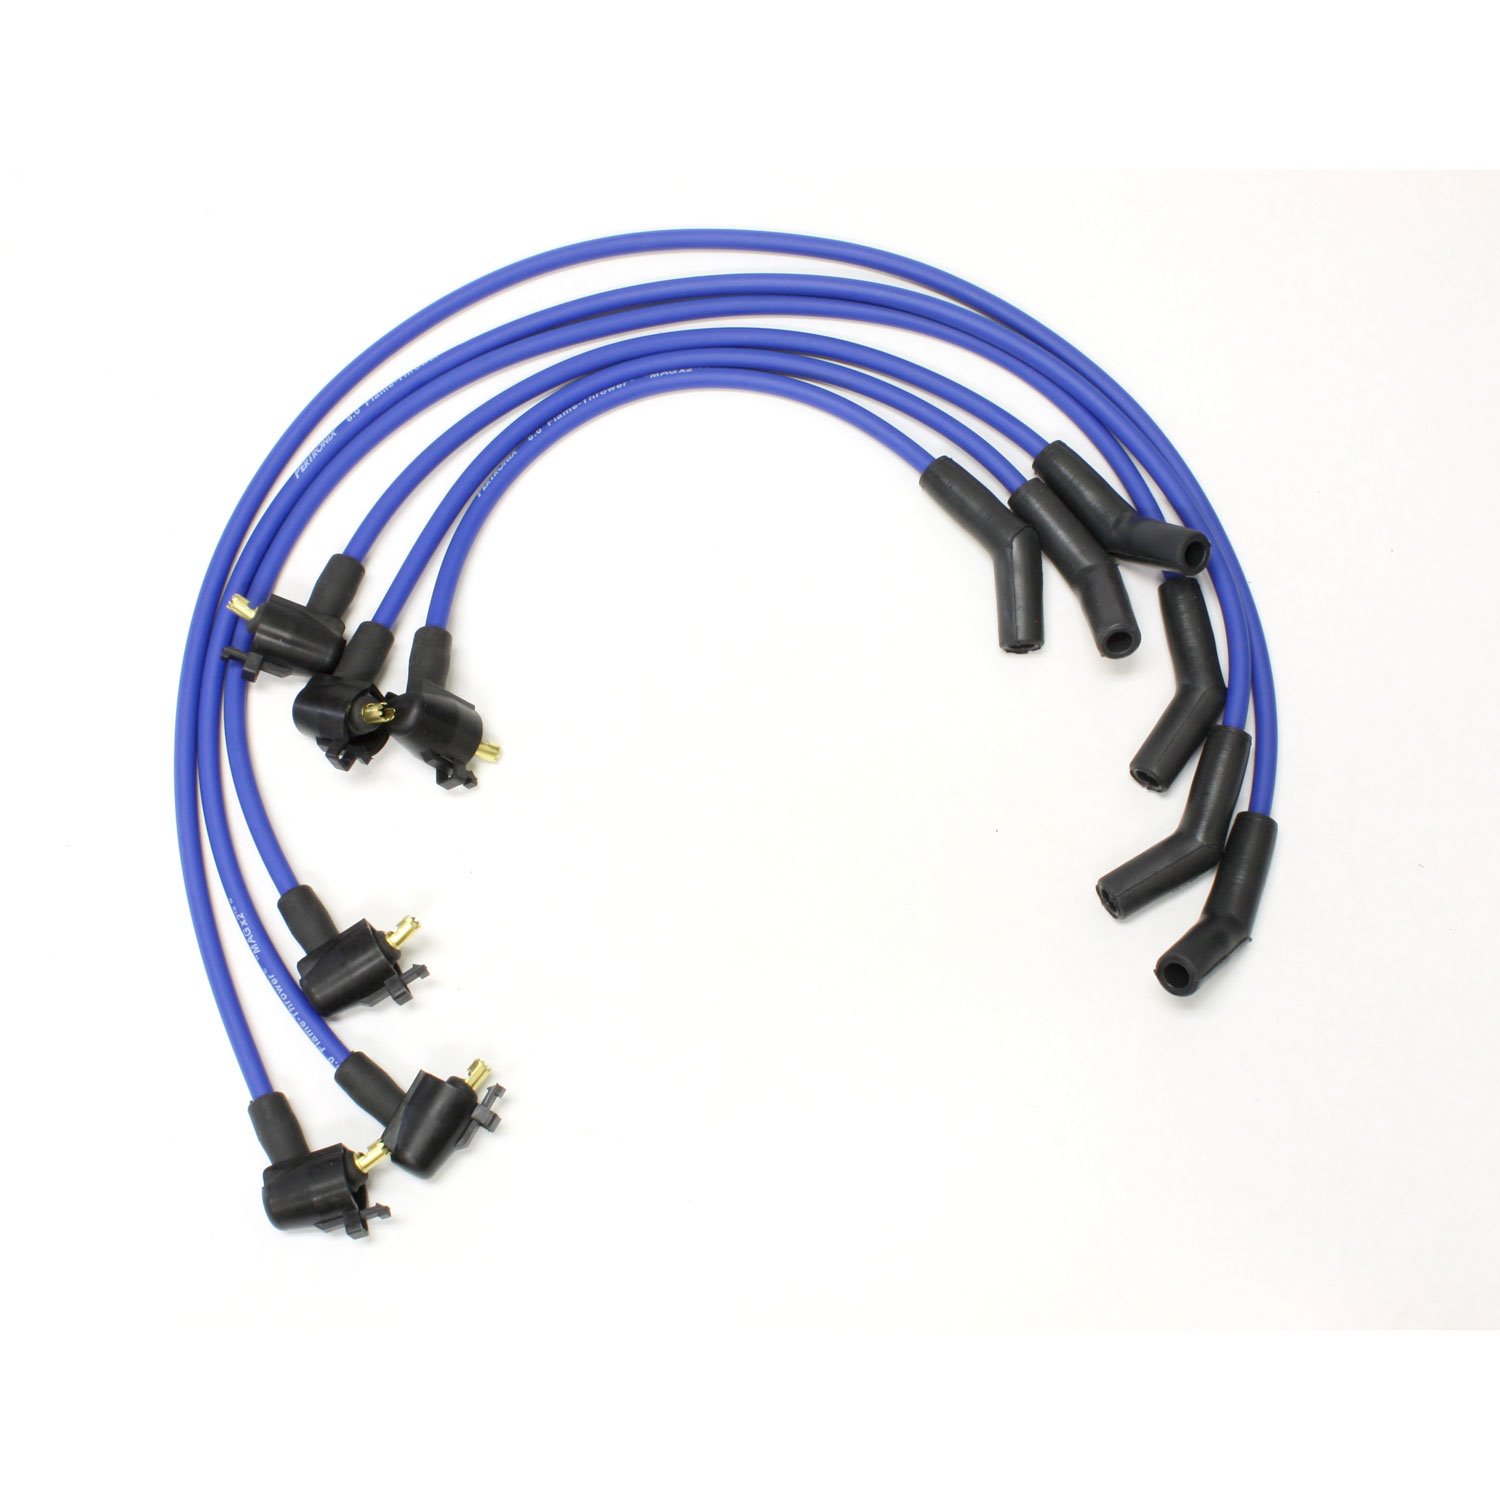 PerTronix 806324 Flame-Thrower Spark Plug Wires 6 cyl Ford Custom Fit Blue